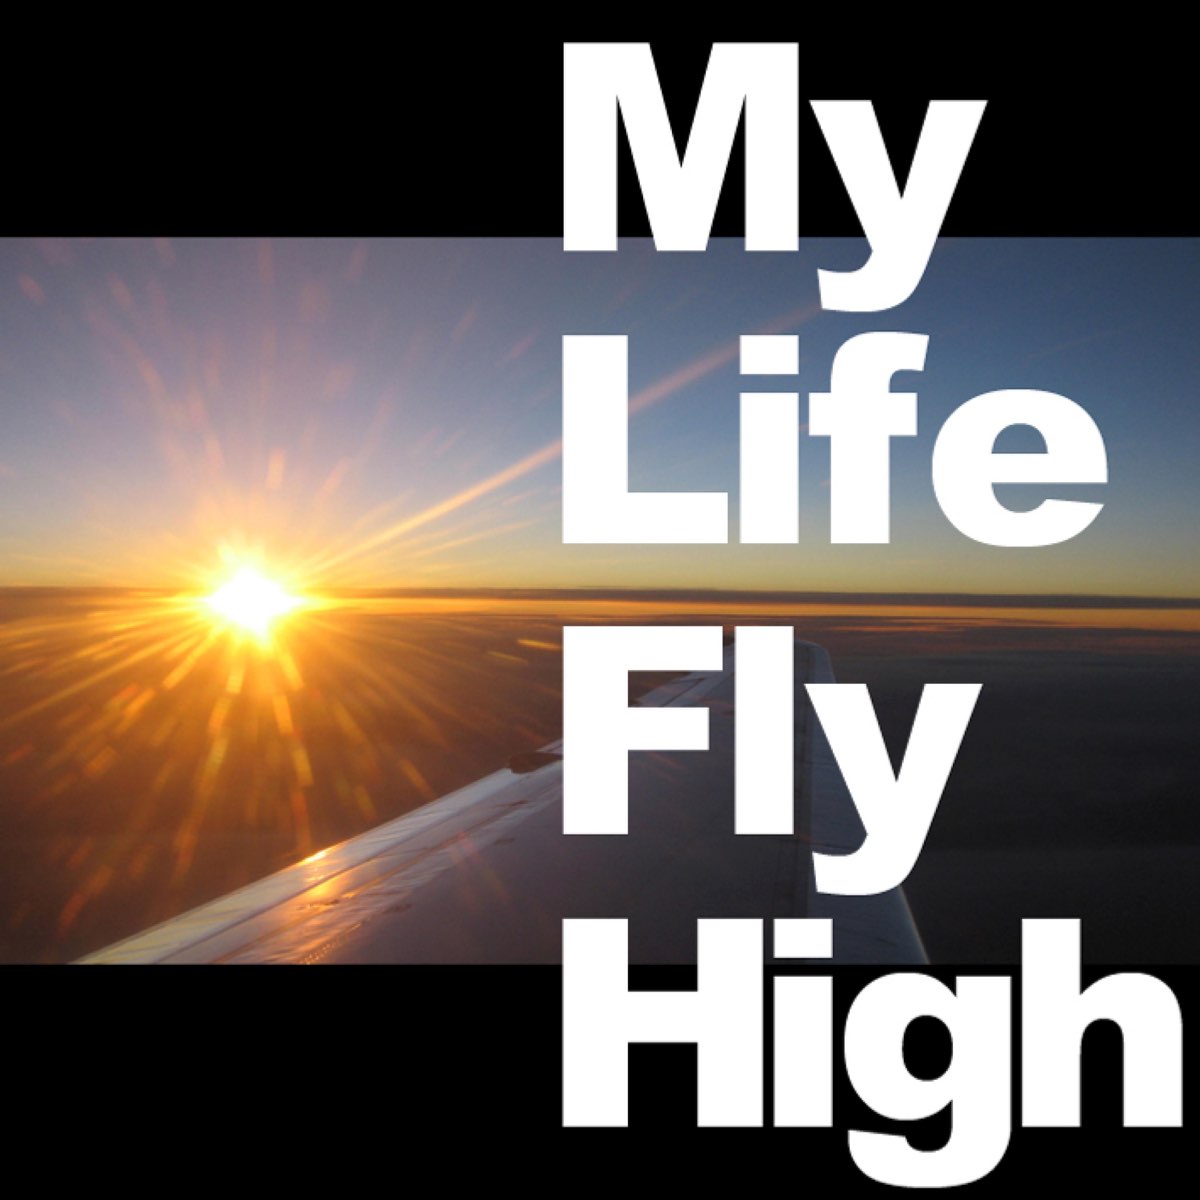 My fly life. Fly Life. Fly High песни. Fly High. Fly High Возраст.